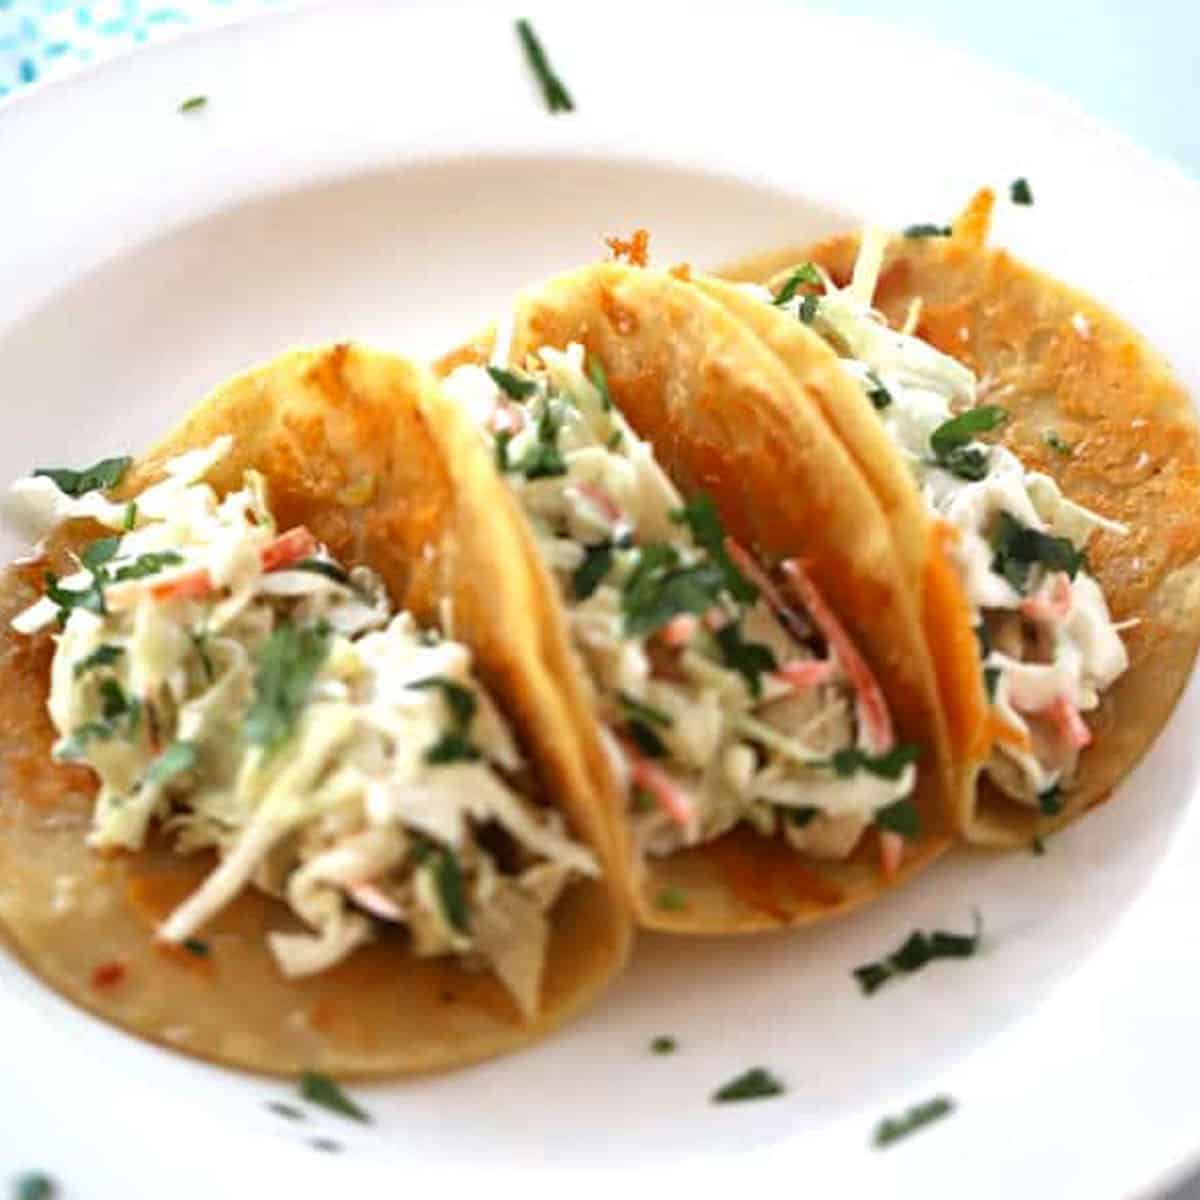 crockpot Cilantro Lime Chicken tacos are delicious on taco tuesday and the other 6 days of the week we wish were taco Tuesday! So delicious!